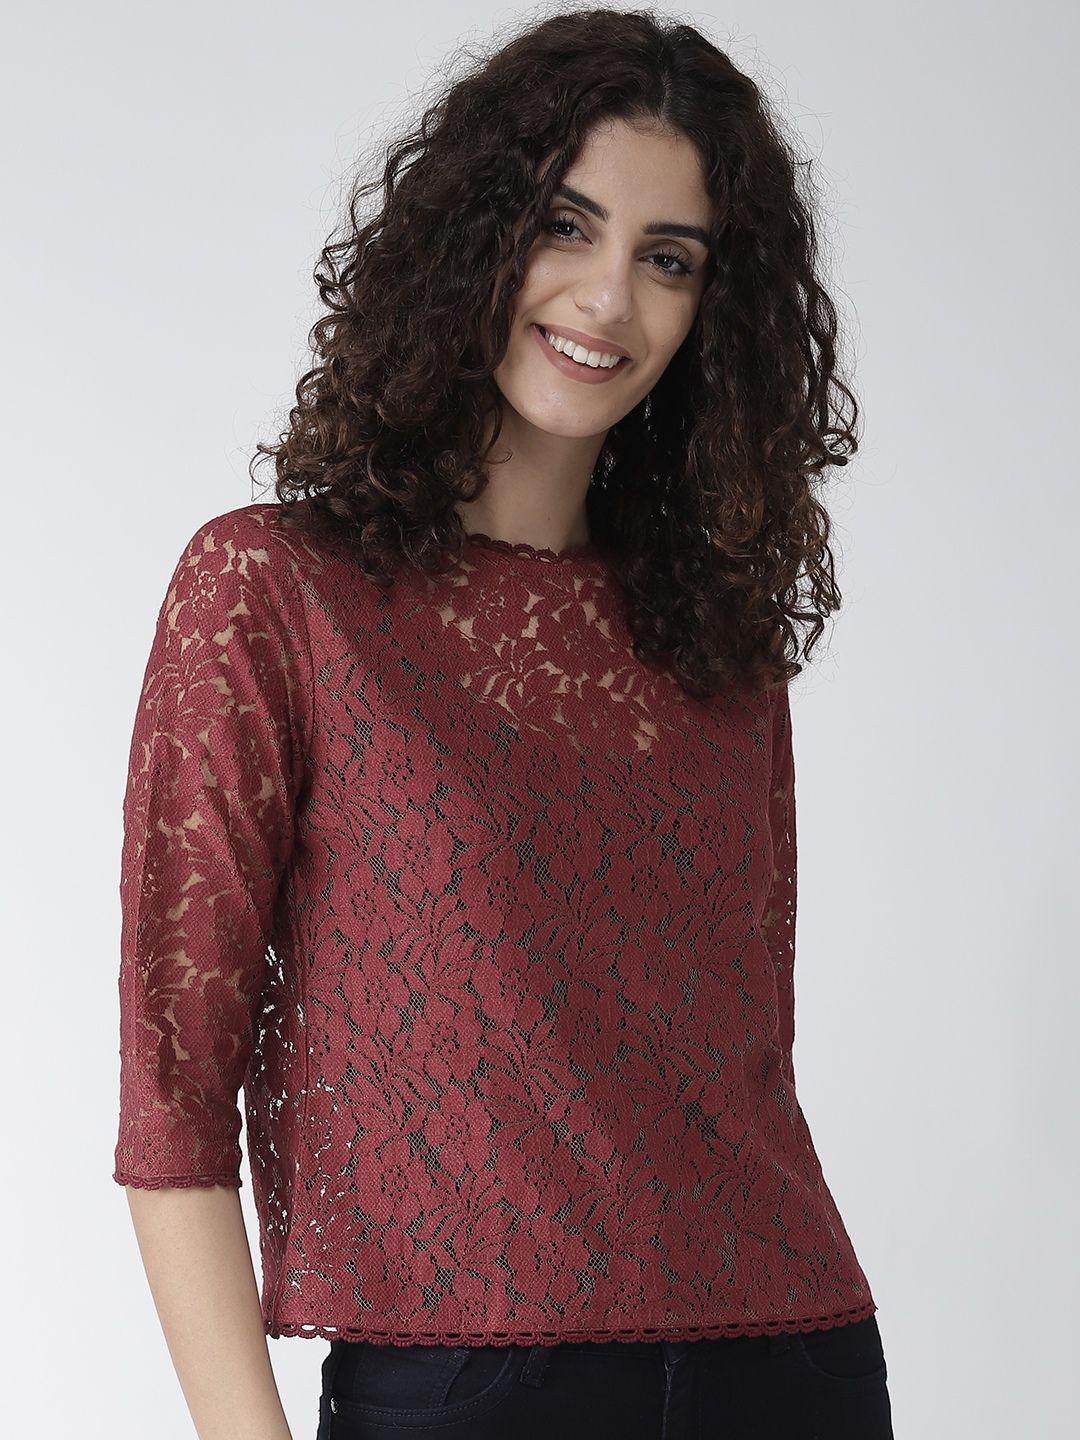 style quotient women maroon semi-sheer lace top